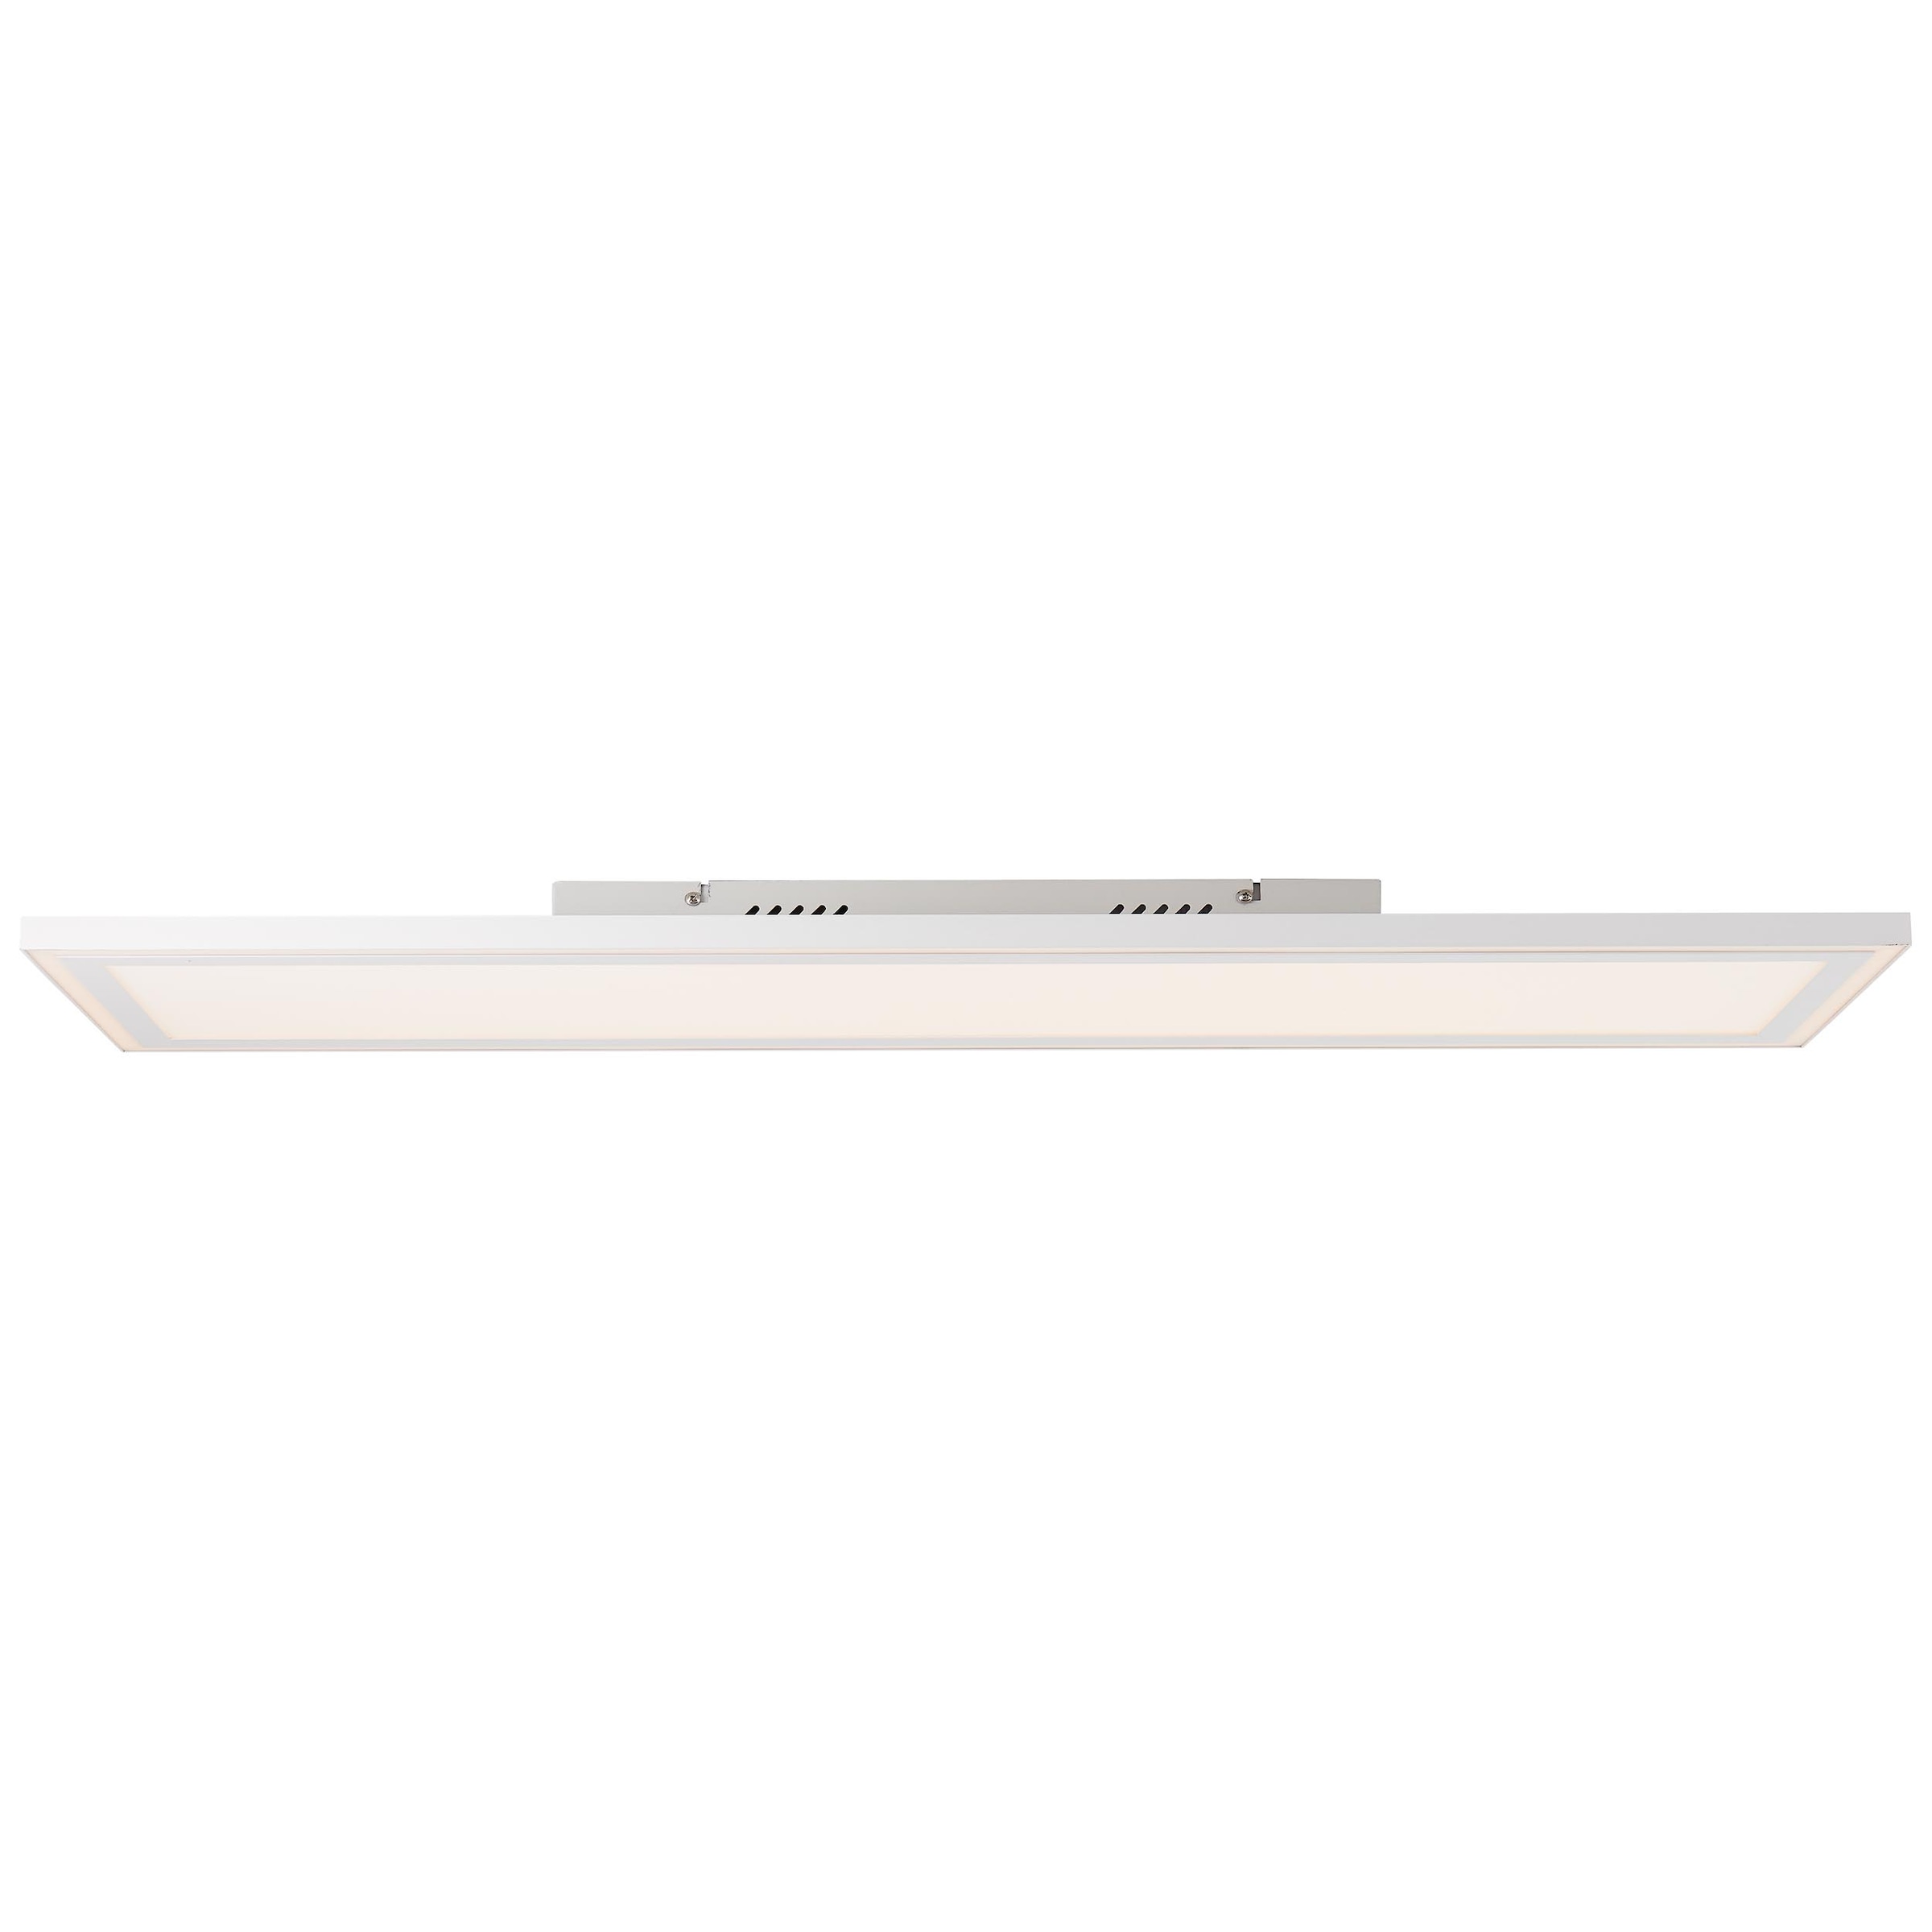 LED Panel »Laurice«, 1 flammig, LED Deckenlampe 100x25cm weiss